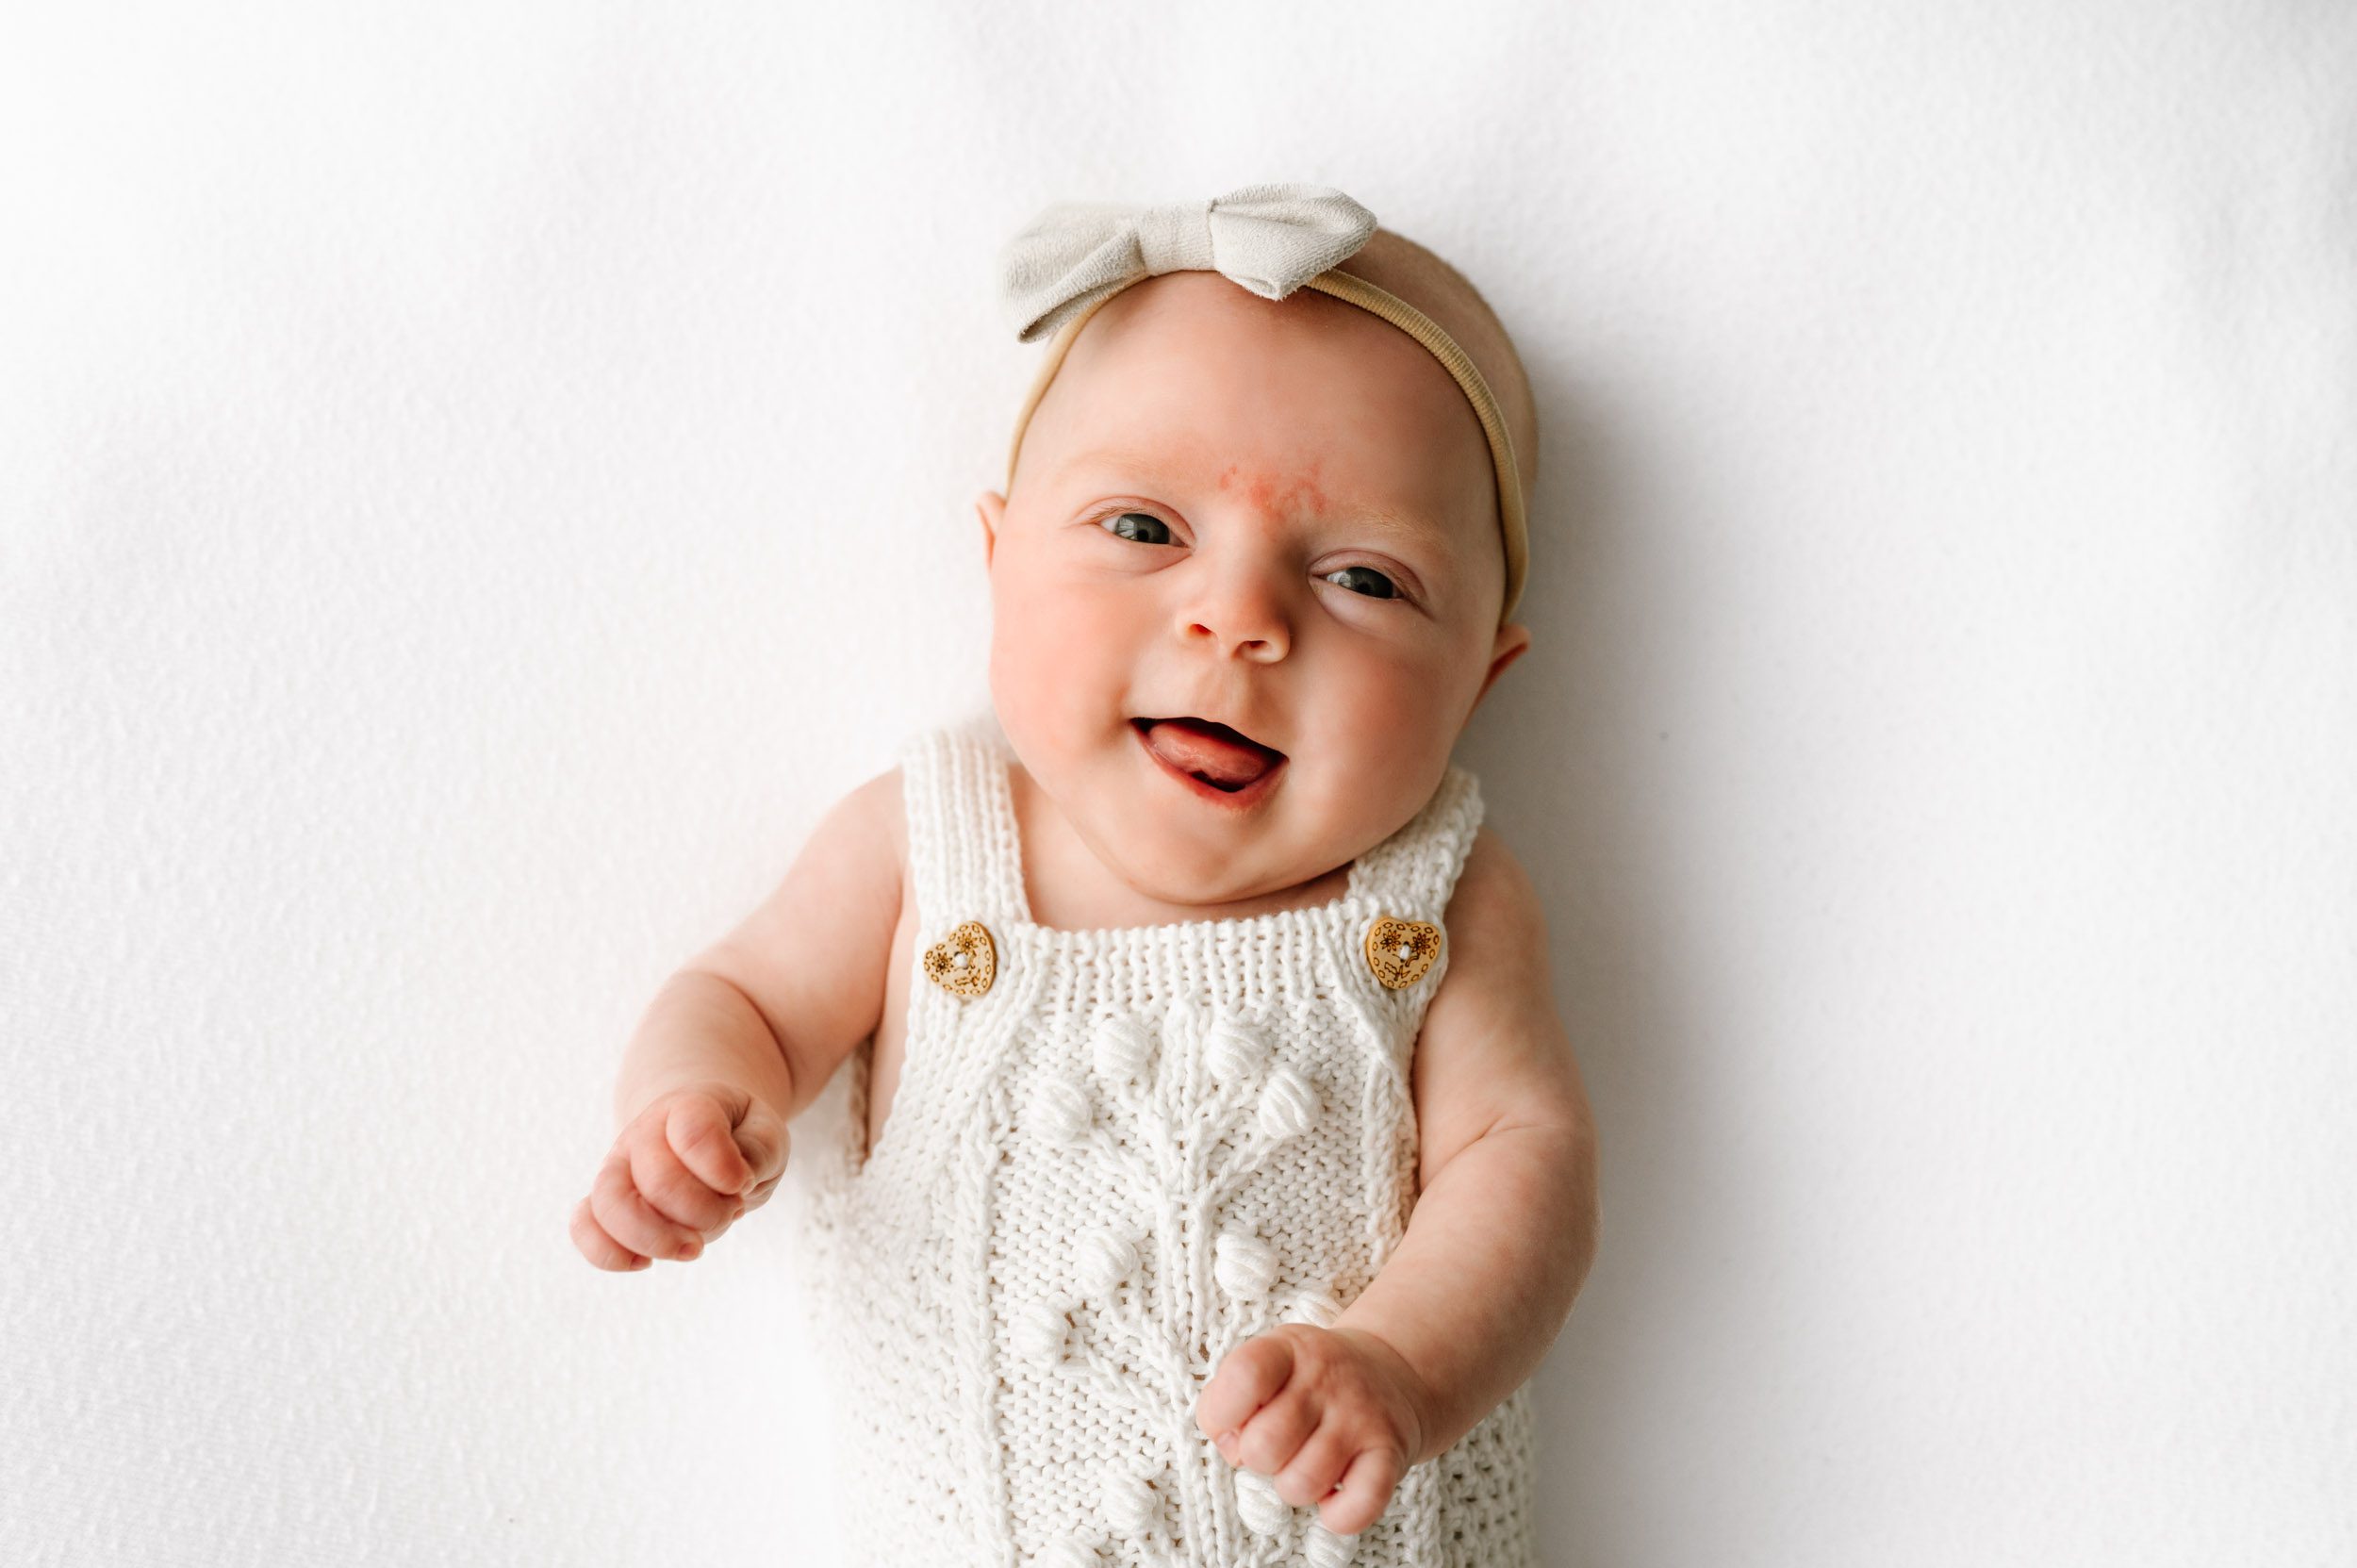 a baby girl wearing a white textured knit romper laying on a white backdrop and smiling up at the camera with her tongue sticking out